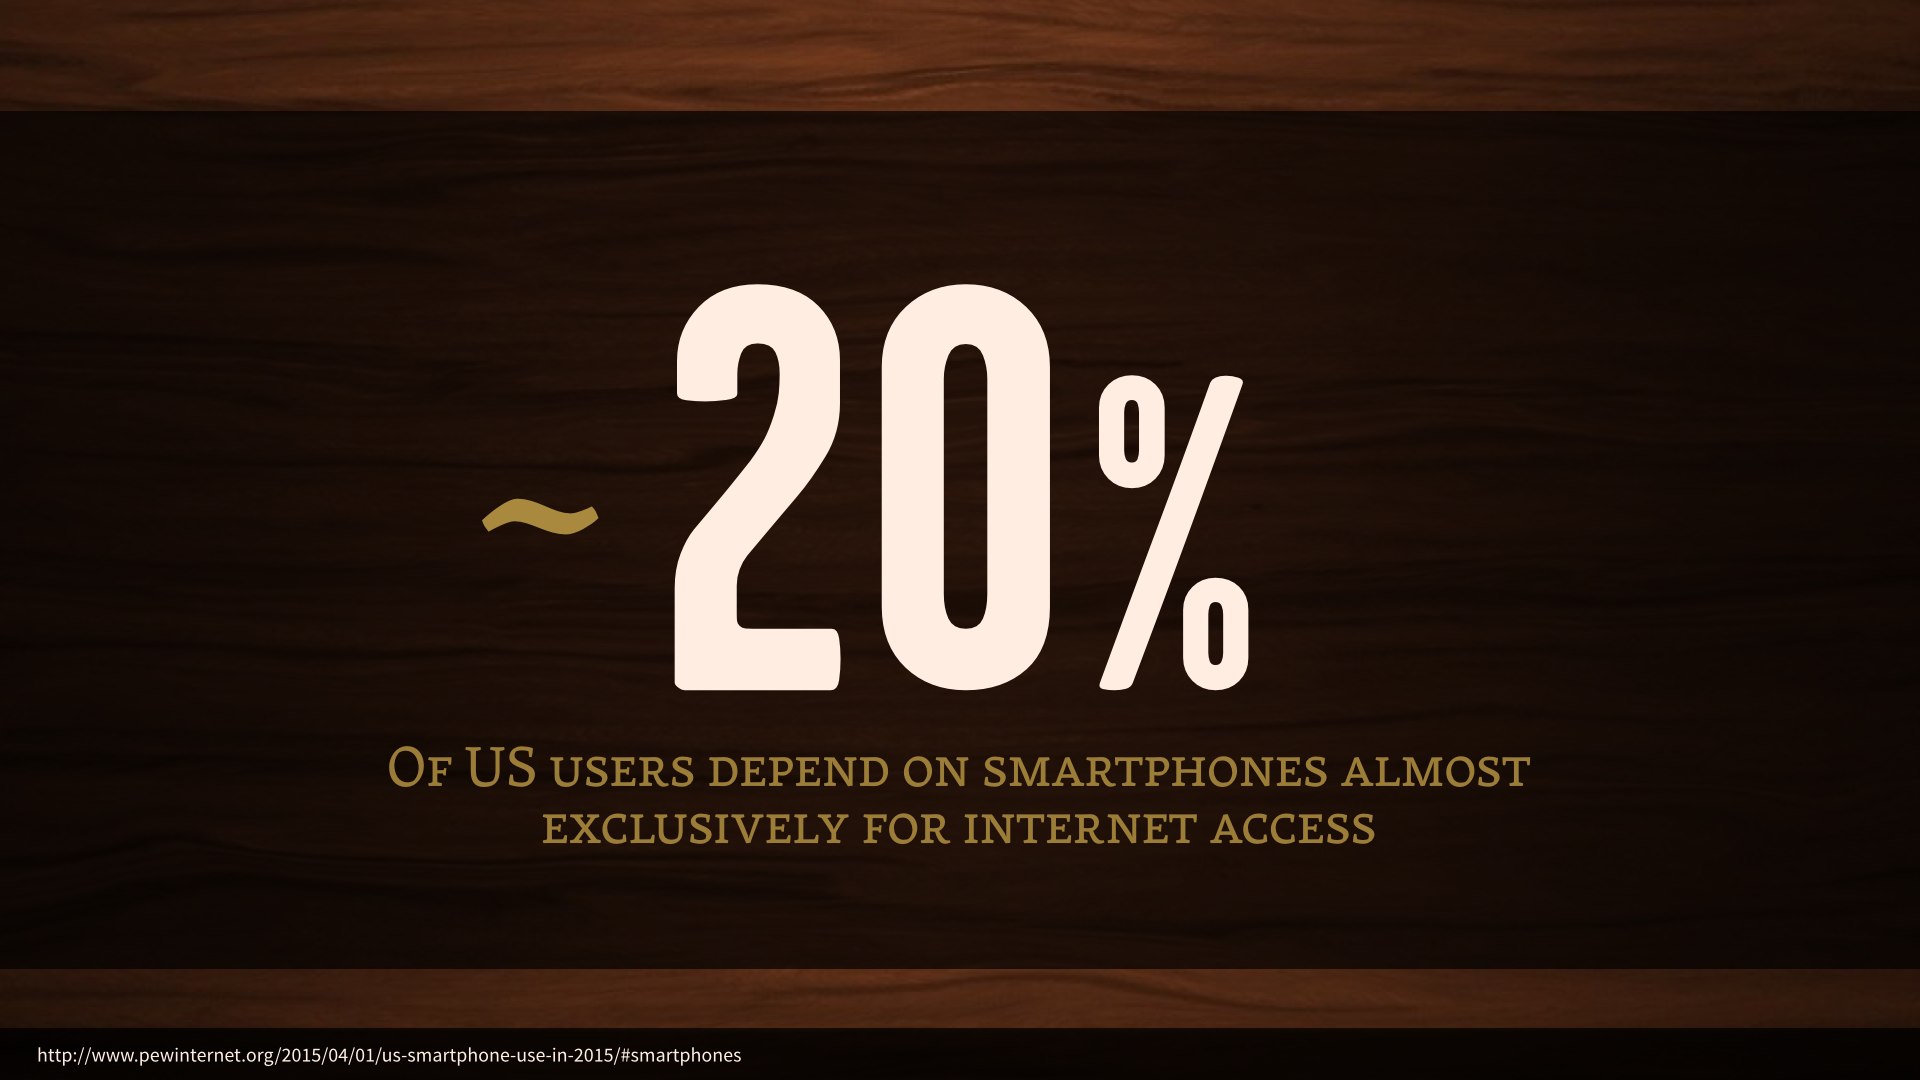 Roughly 20% of US users depend on smartphones almost exclusively for internet access